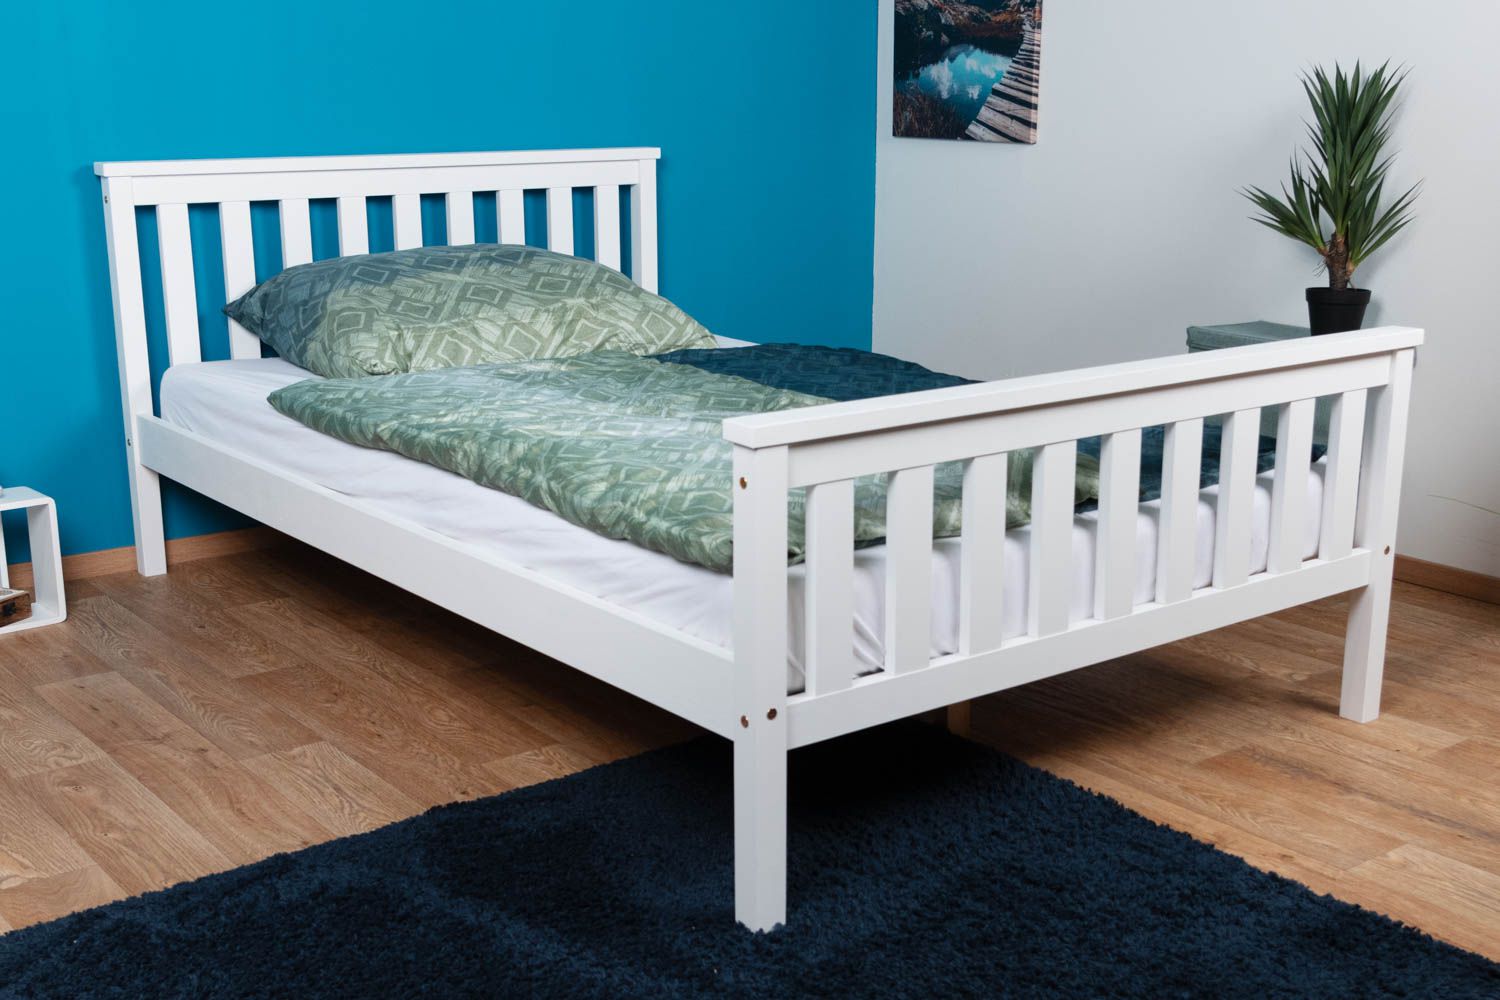 Single bed / guest bed solid pine wood white lacquered A28, incl. slatted frame - dimensions 120 x 200 cm 